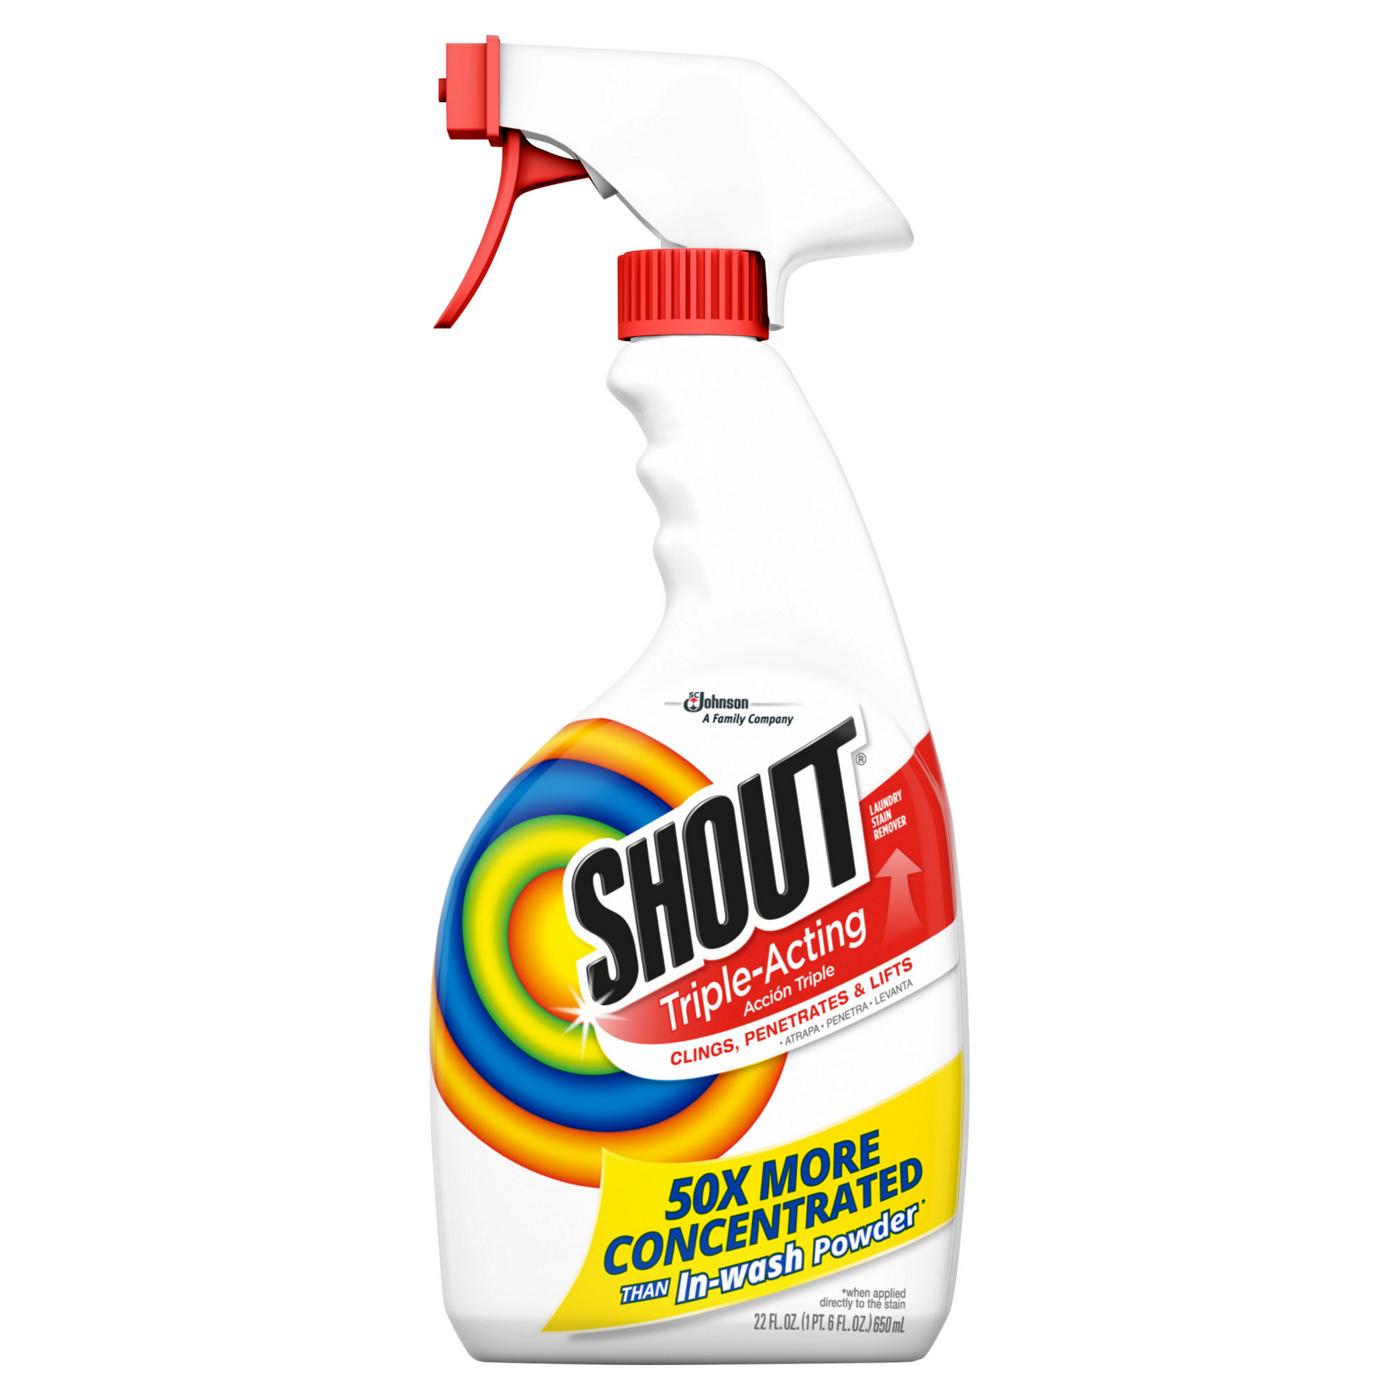 Shout Triple-Acting Laundry Stain Remover; image 1 of 3